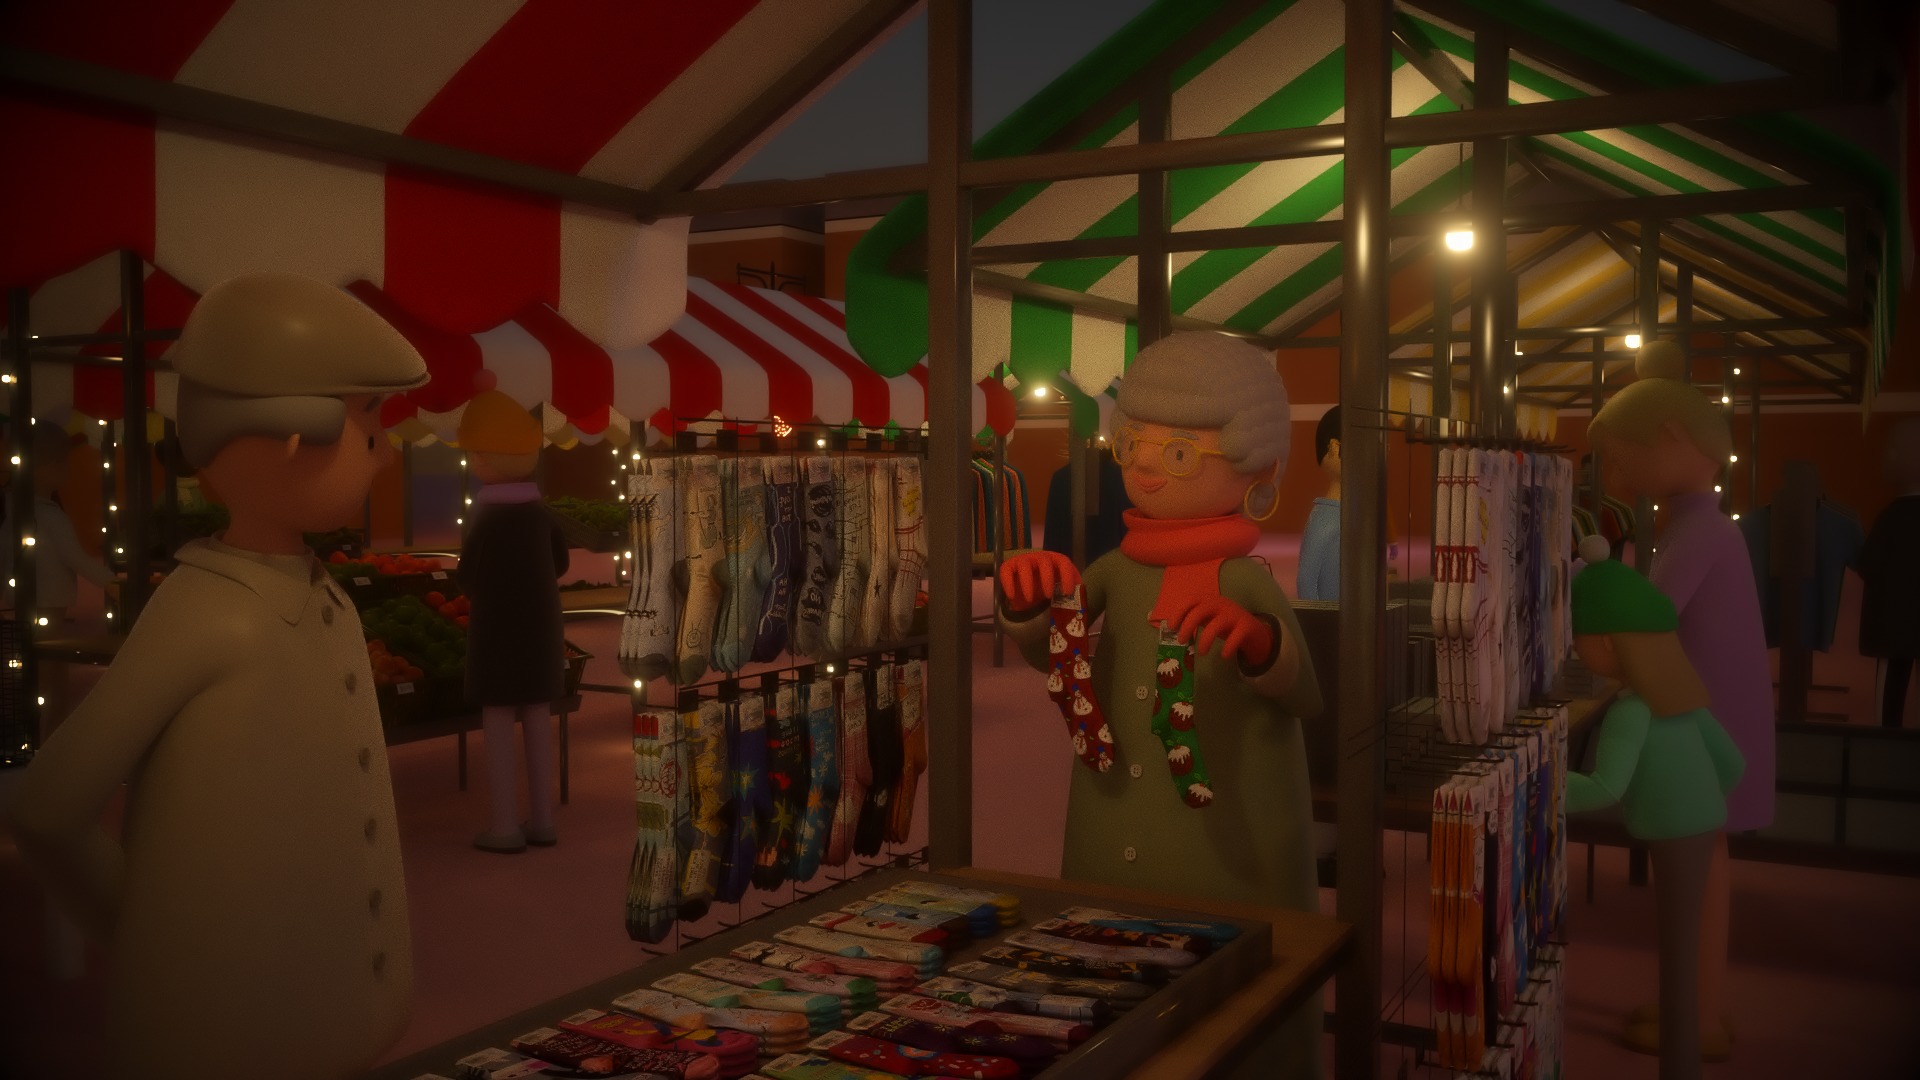 Animated figures at the Christmas market (Image: Oldham Council).